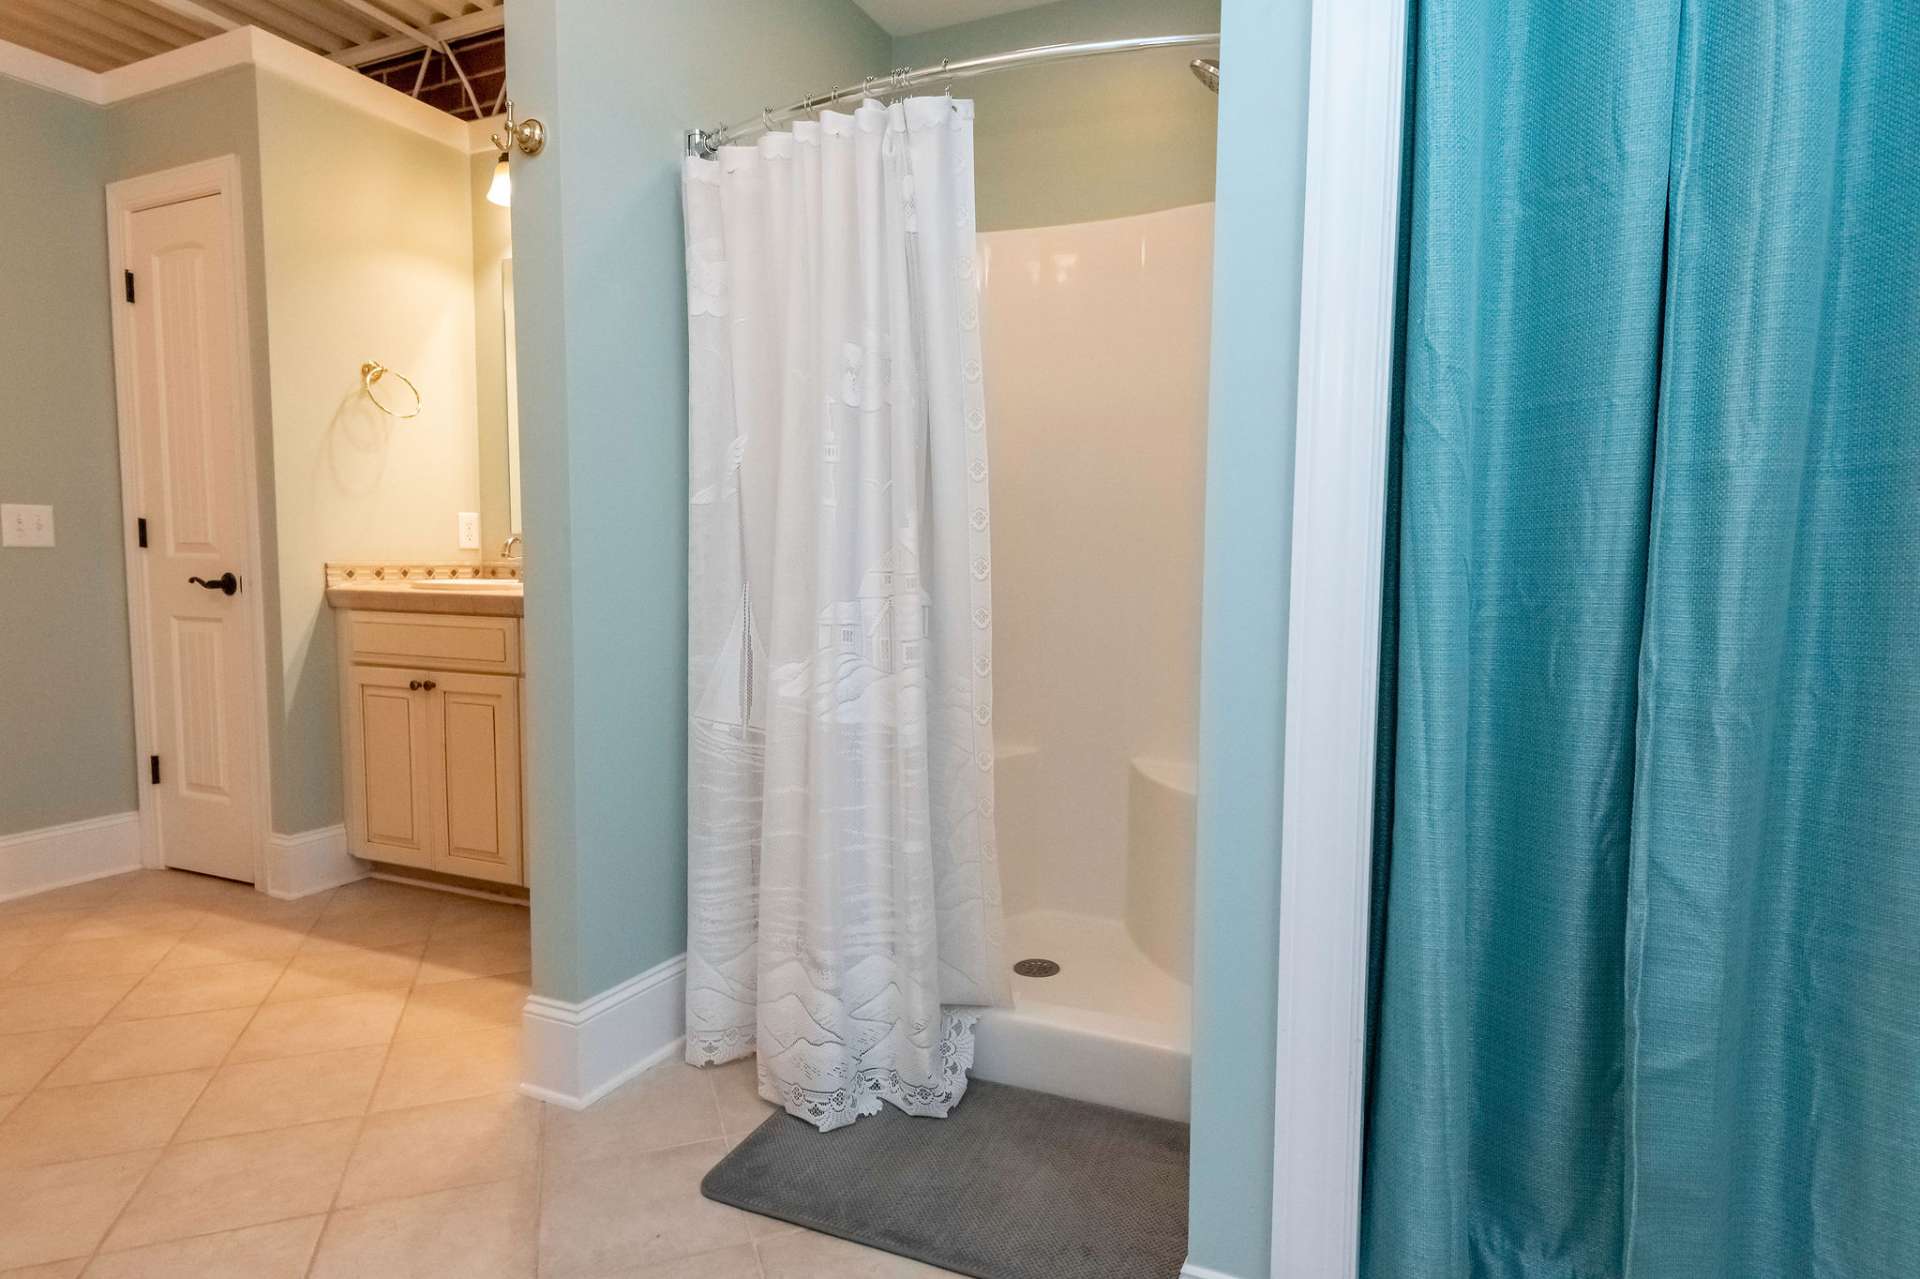 Equipped with a soaking tub shower and double sinks, as well!